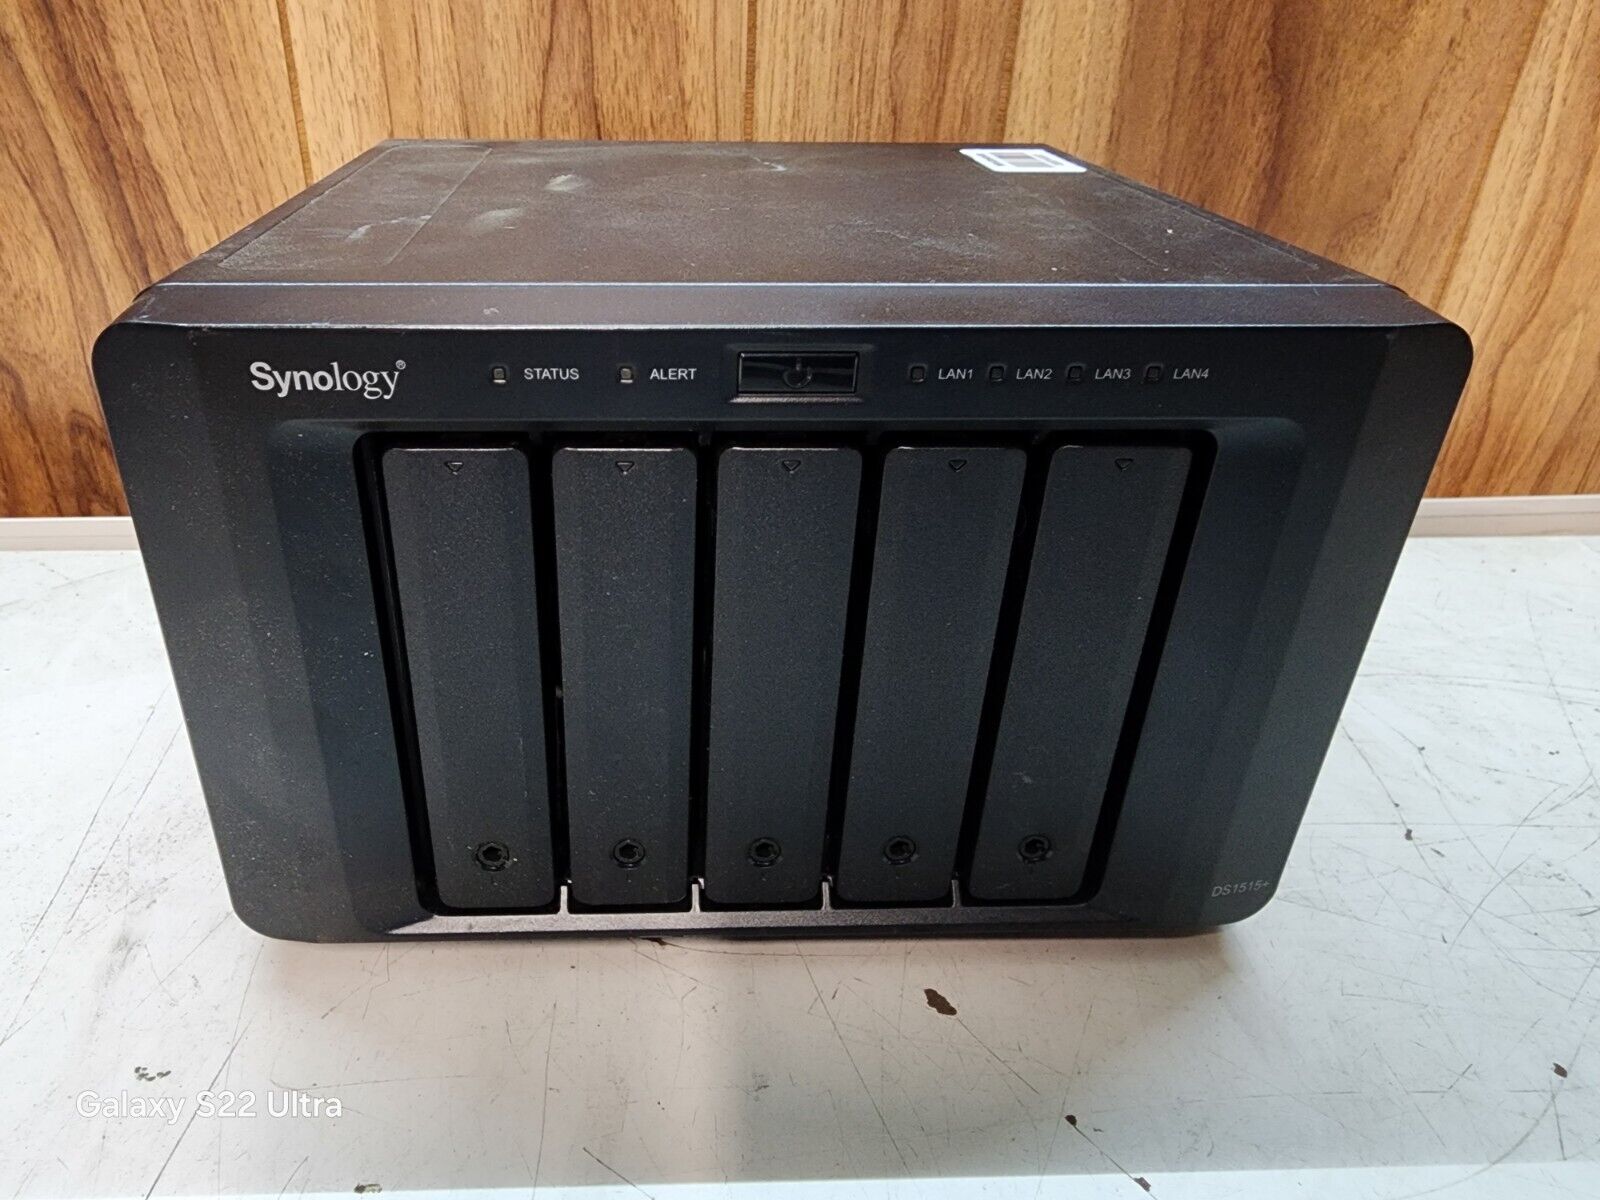 Synology DiskStation DS1515 5-Bay NAS Server (Diskless) Caddy Issues Please Read